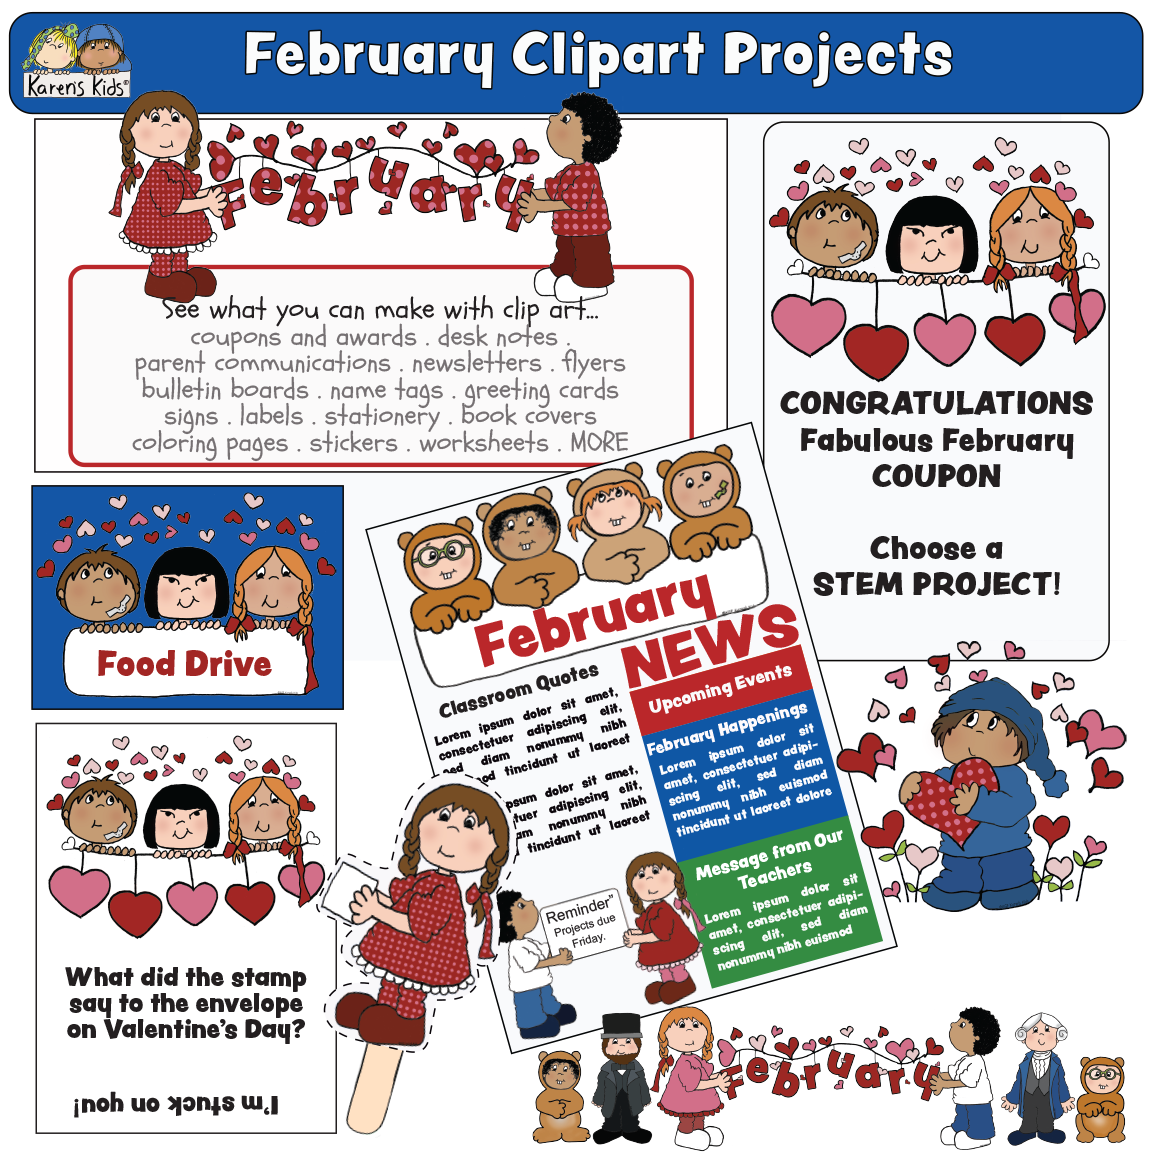 Full color images showing samples of what you can do with Karen's Kids February clipart: coupons, flyers, newsletters and more.